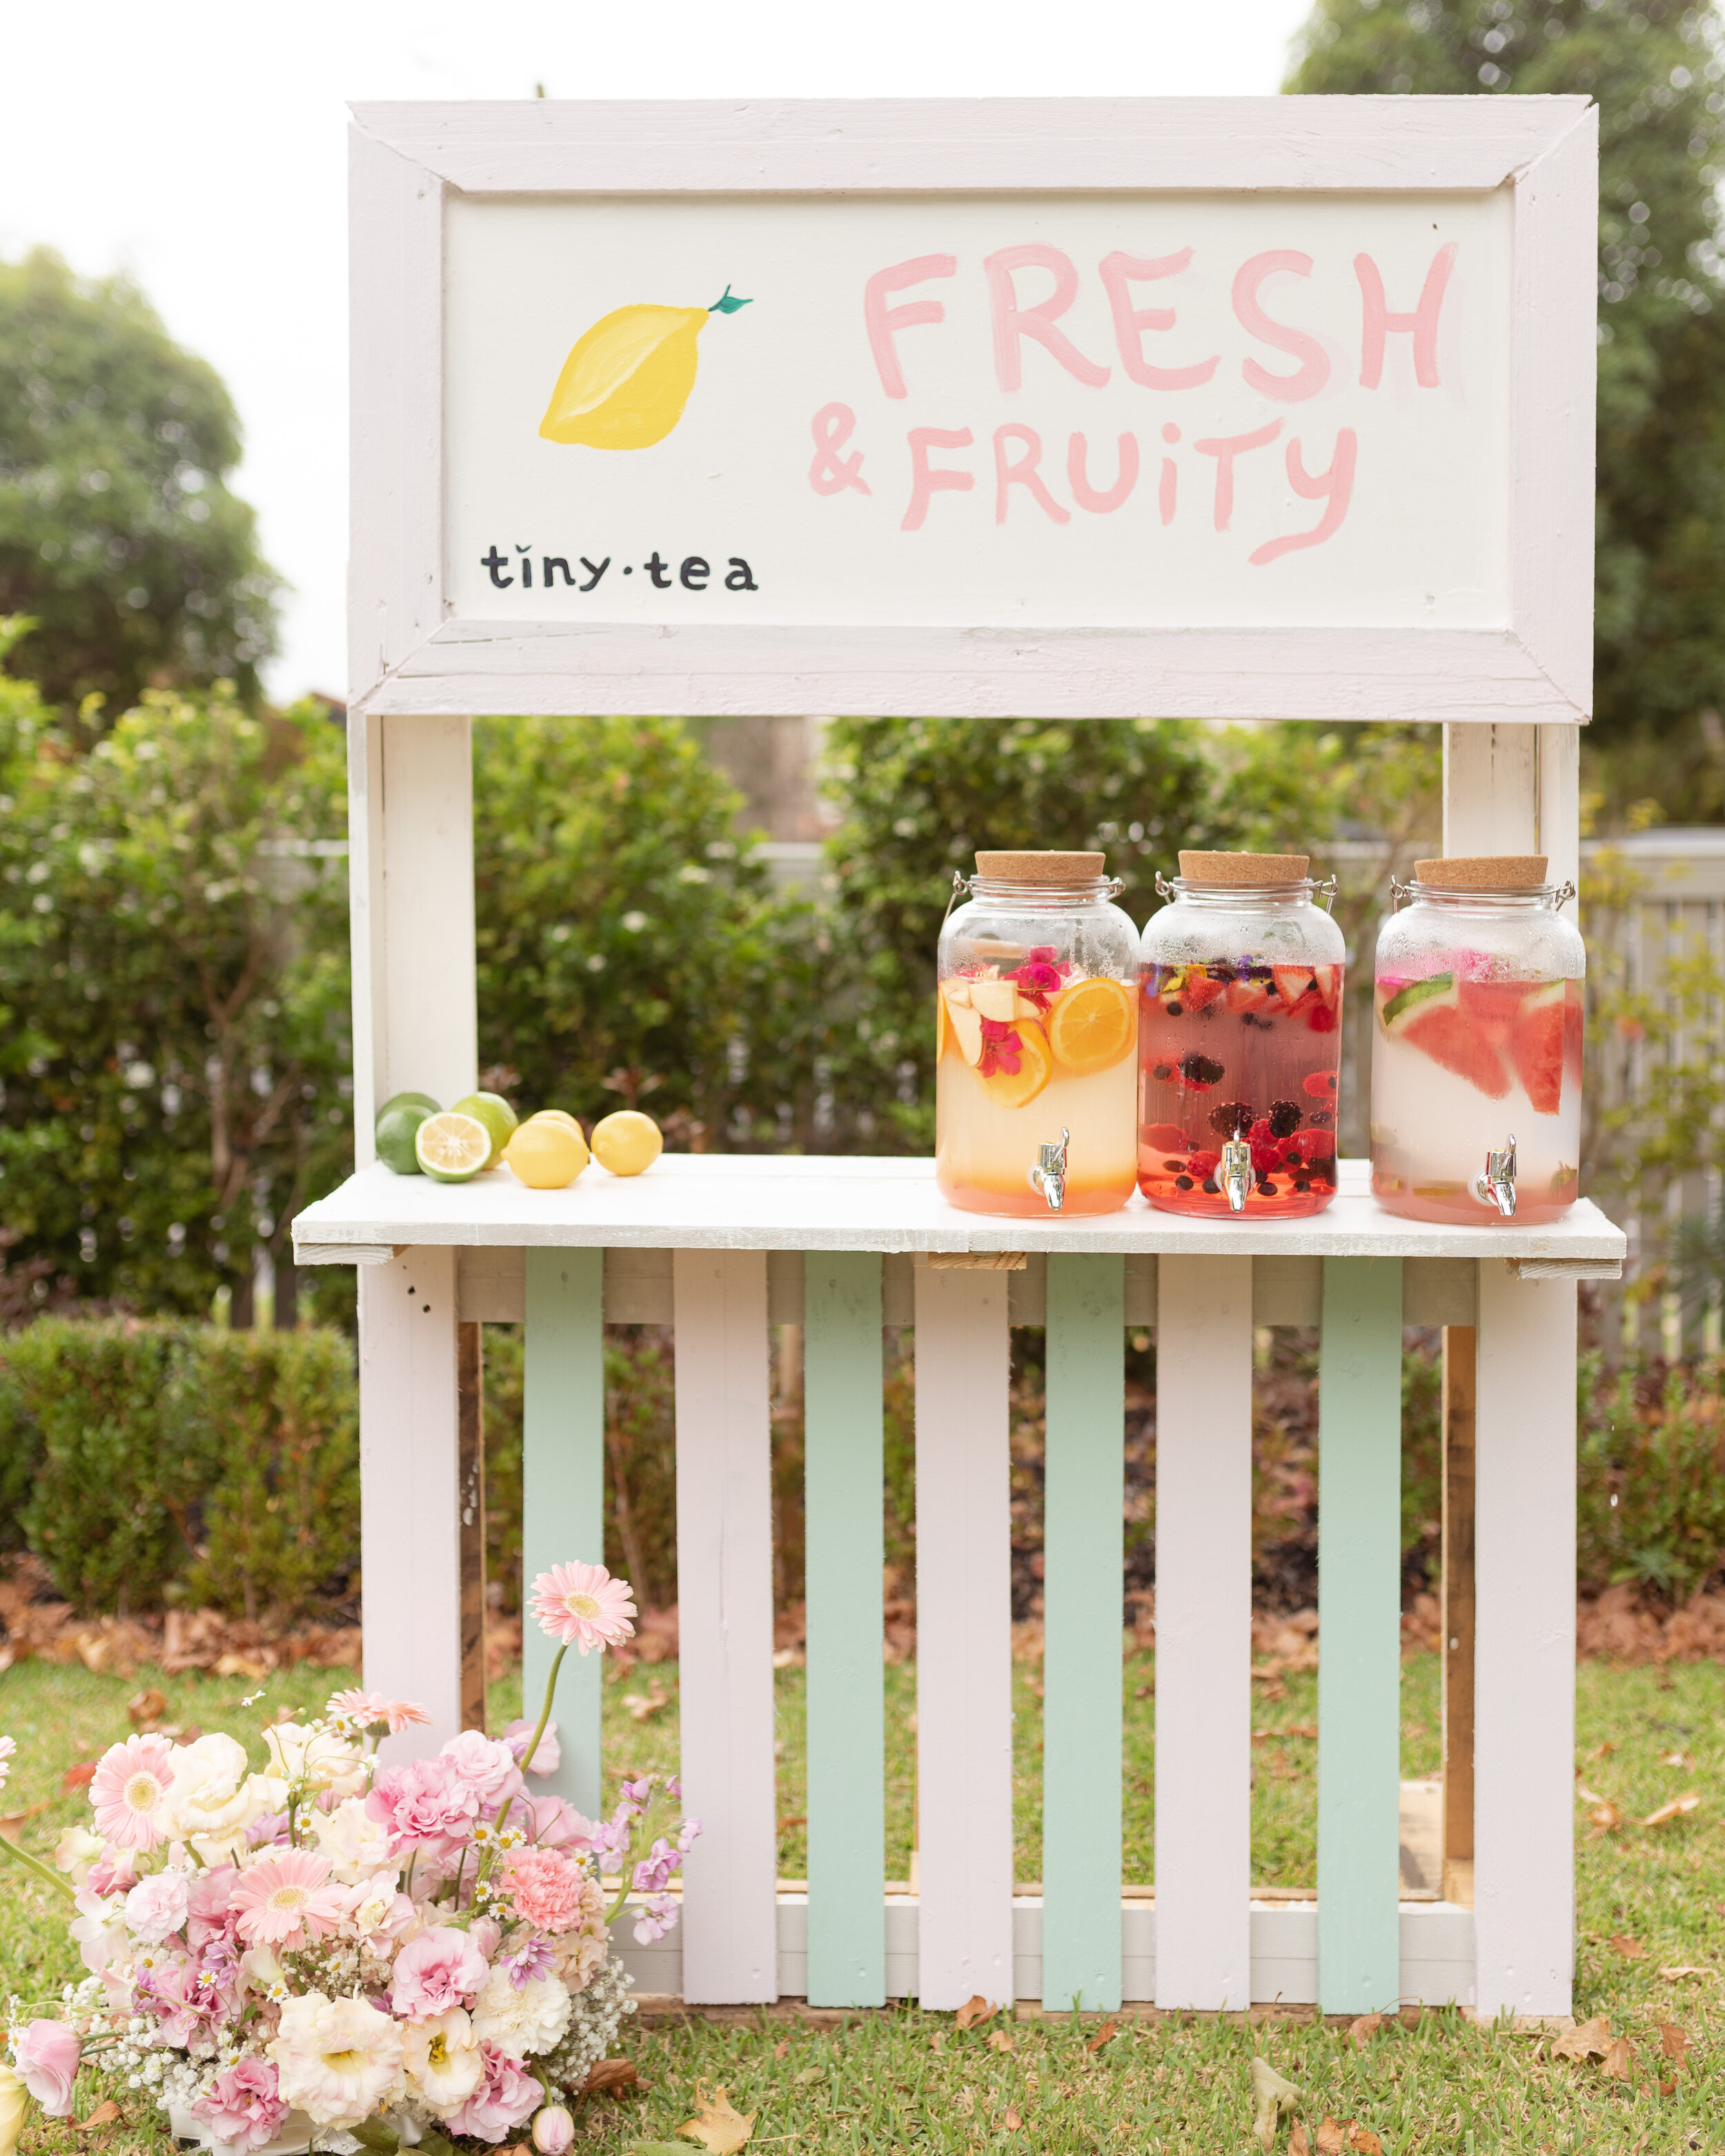 Another drinks stands, this one reading, "Fresh and Fruity, tiny tea". With fresh cut lemons and lime, next to full drinks dispensers, full with tea and fresh fruit. 
Starting the day with an outdoor garden party, we worked with the brief in mind - that being modern, fun and fresh, with light pastel colours - to create a stunning picnic setting.Complete with carefully curated florals, decals, dinnerware, stationary and tasty treats, chalk and colouring-in stations, a tea station and tea stands - of course - and the most dreamy cubby house that we definitely all wanted in our own backyard, it really was the perfect party for the kids!